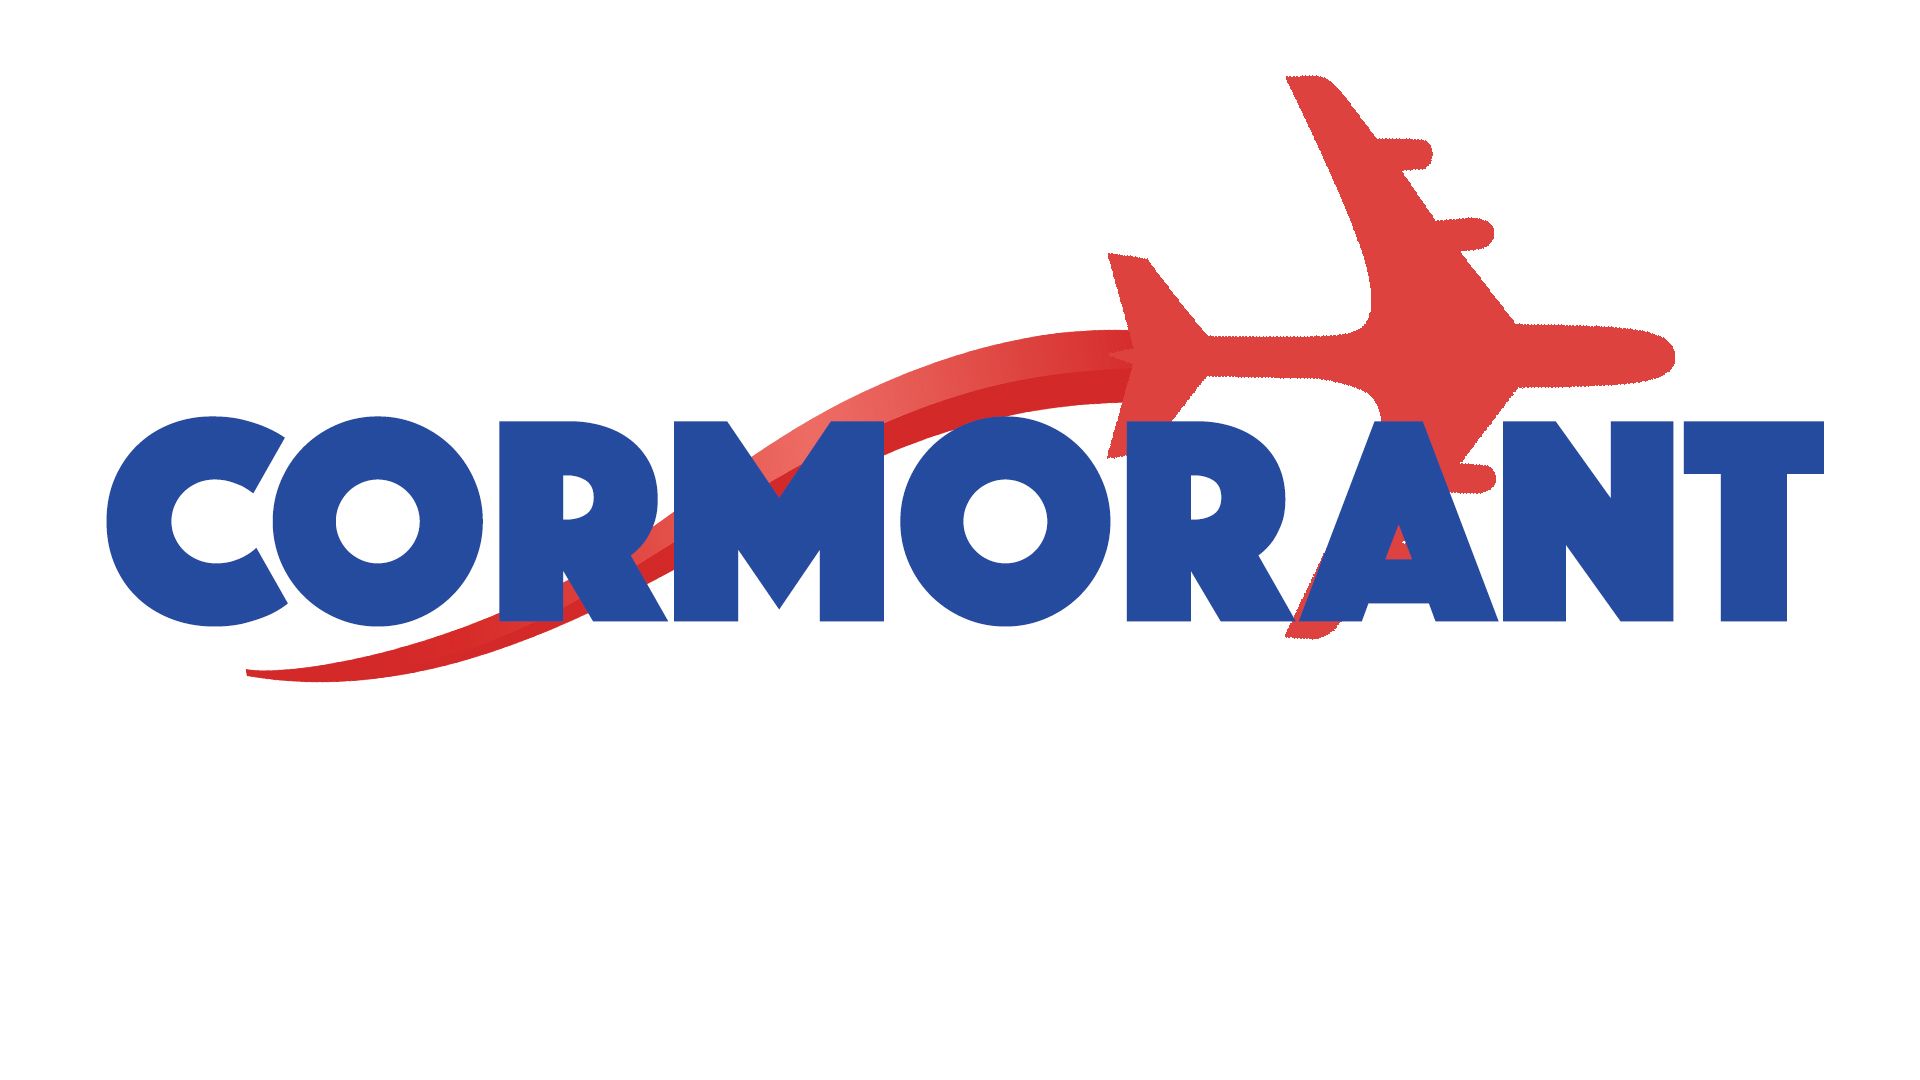 fictional airline logo